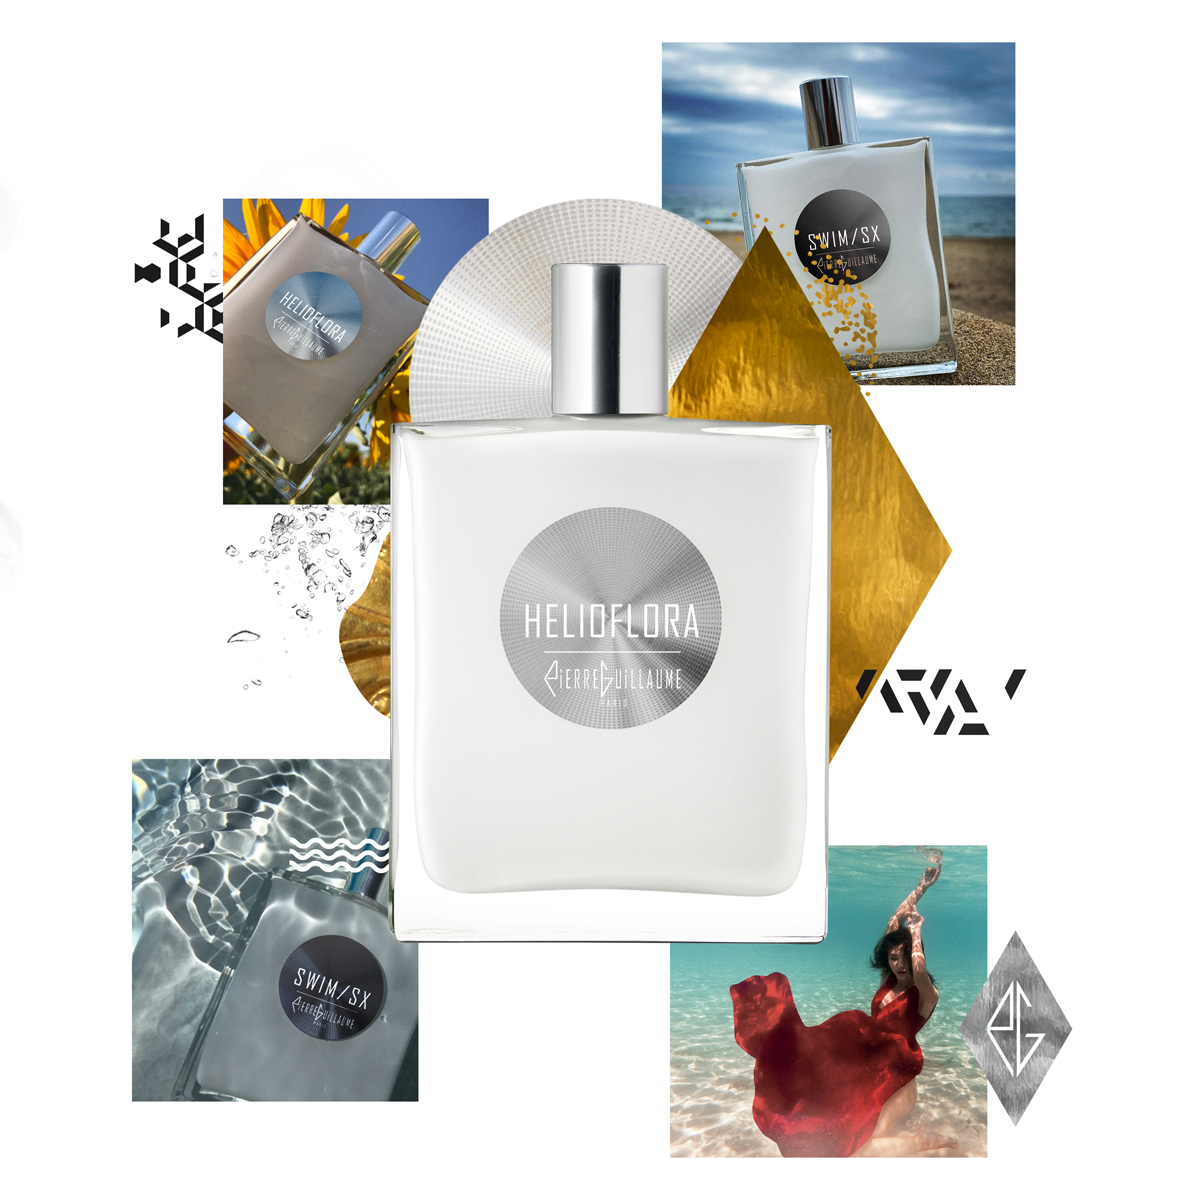 Pierre Guillaume Paris - Pierre Guillaume White Collection, inspired by the sun: sexy and bright fragrances.